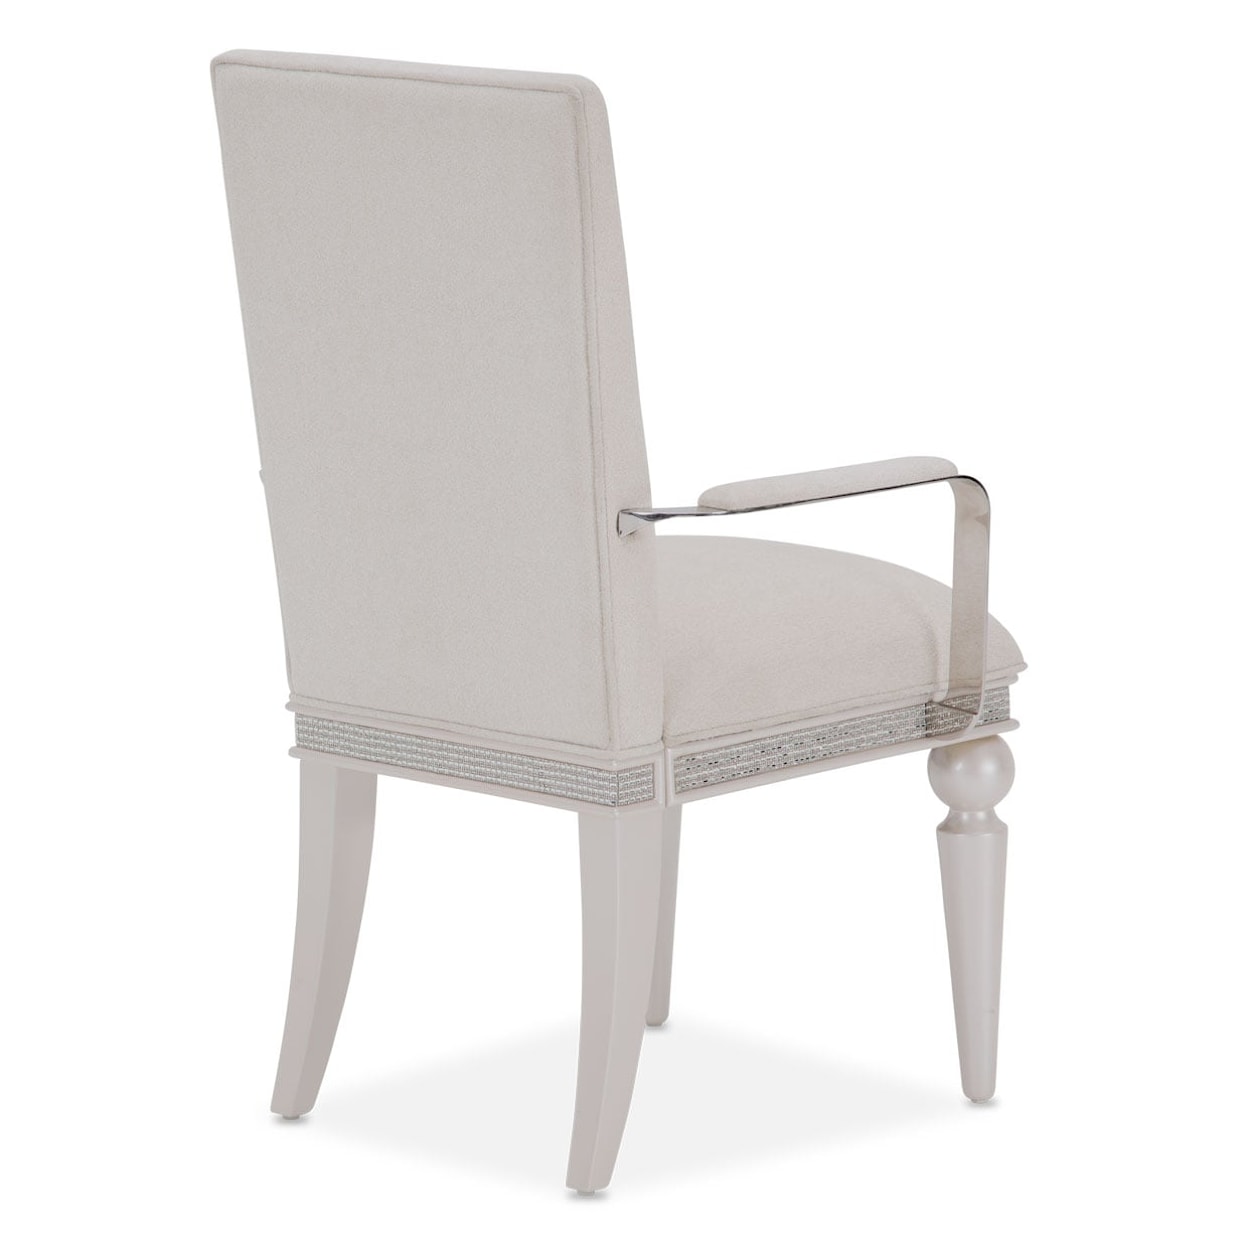 Michael Amini Glimmering Heights Upholstered Dining Arm Chair